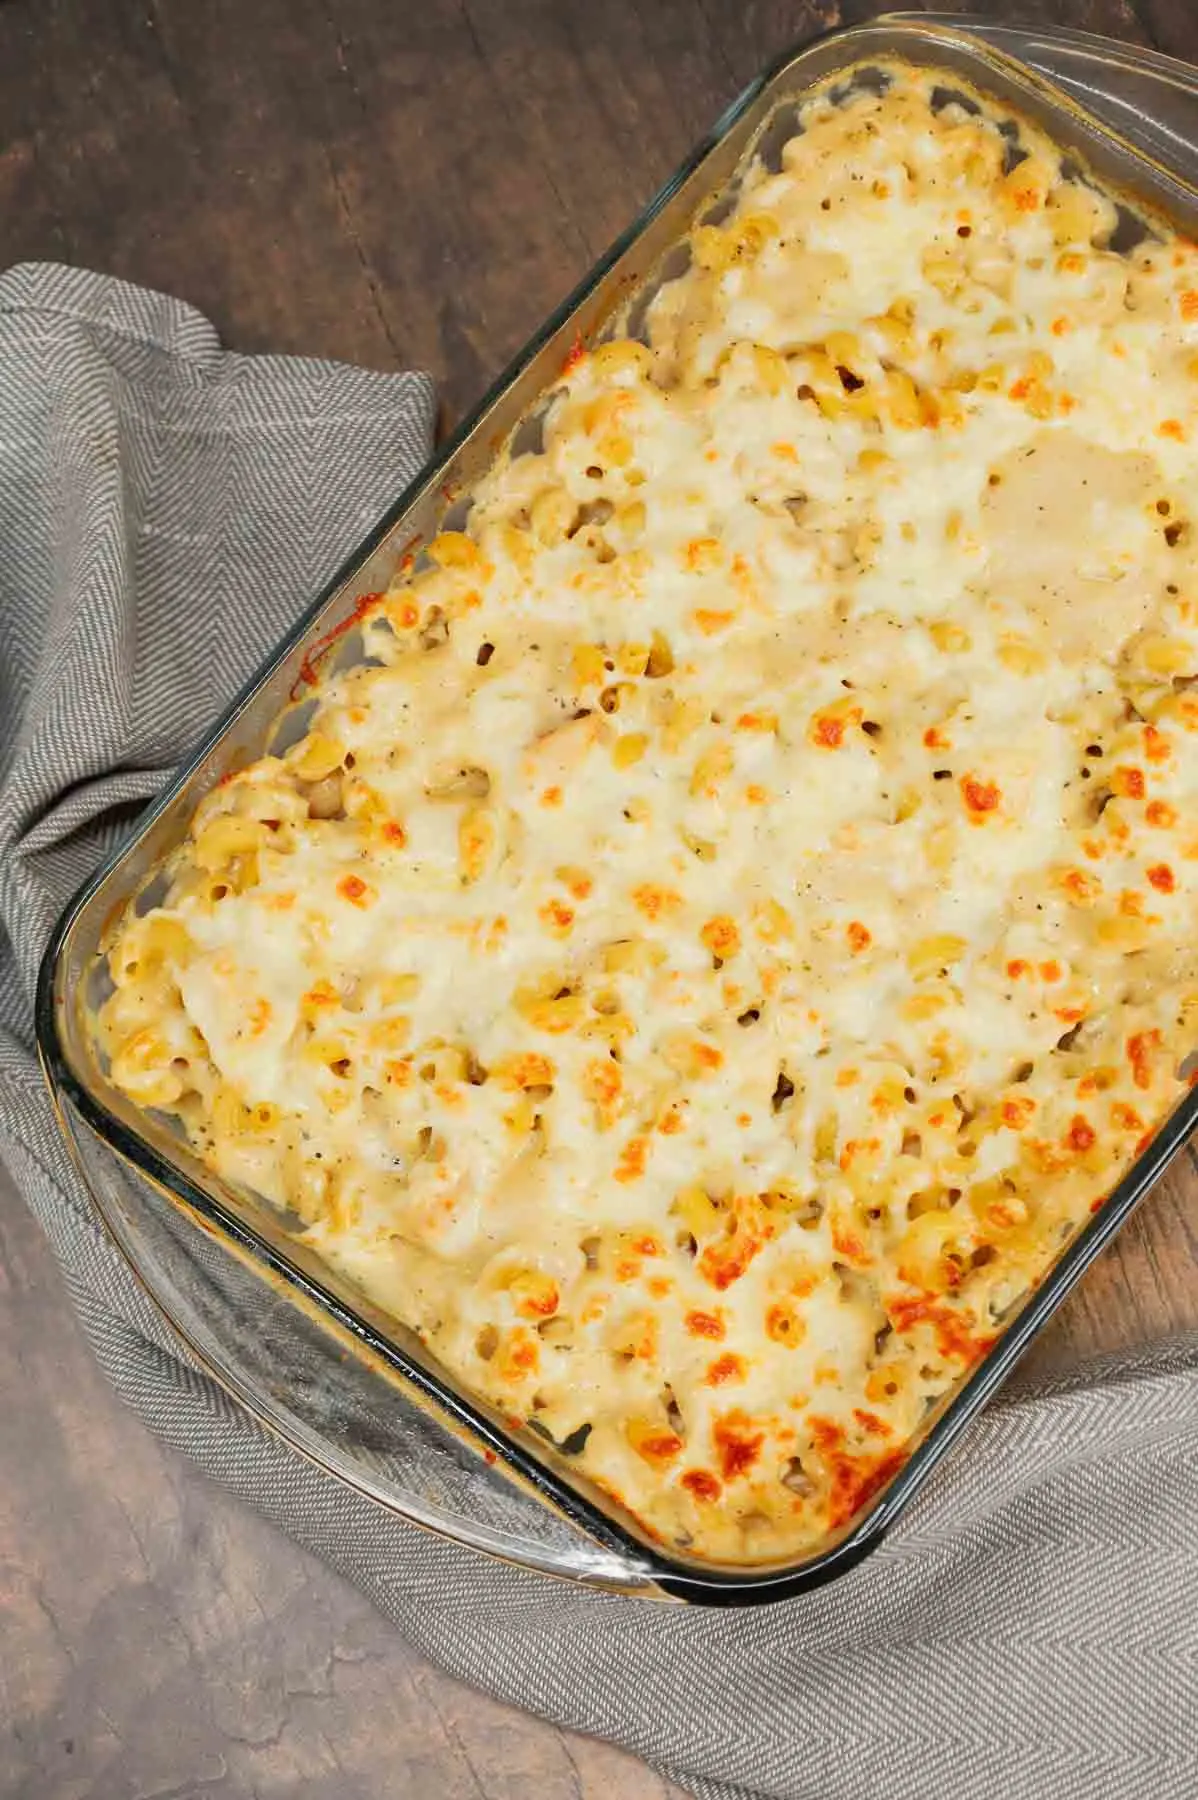 Dump and Bake Chicken Alfredo is an easy one dish meal made with cavatappi pasta, jarred alfredo sauce, condensed cream of bacon soup, chicken broth, chopped rotisserie chicken and mozzarella cheese.